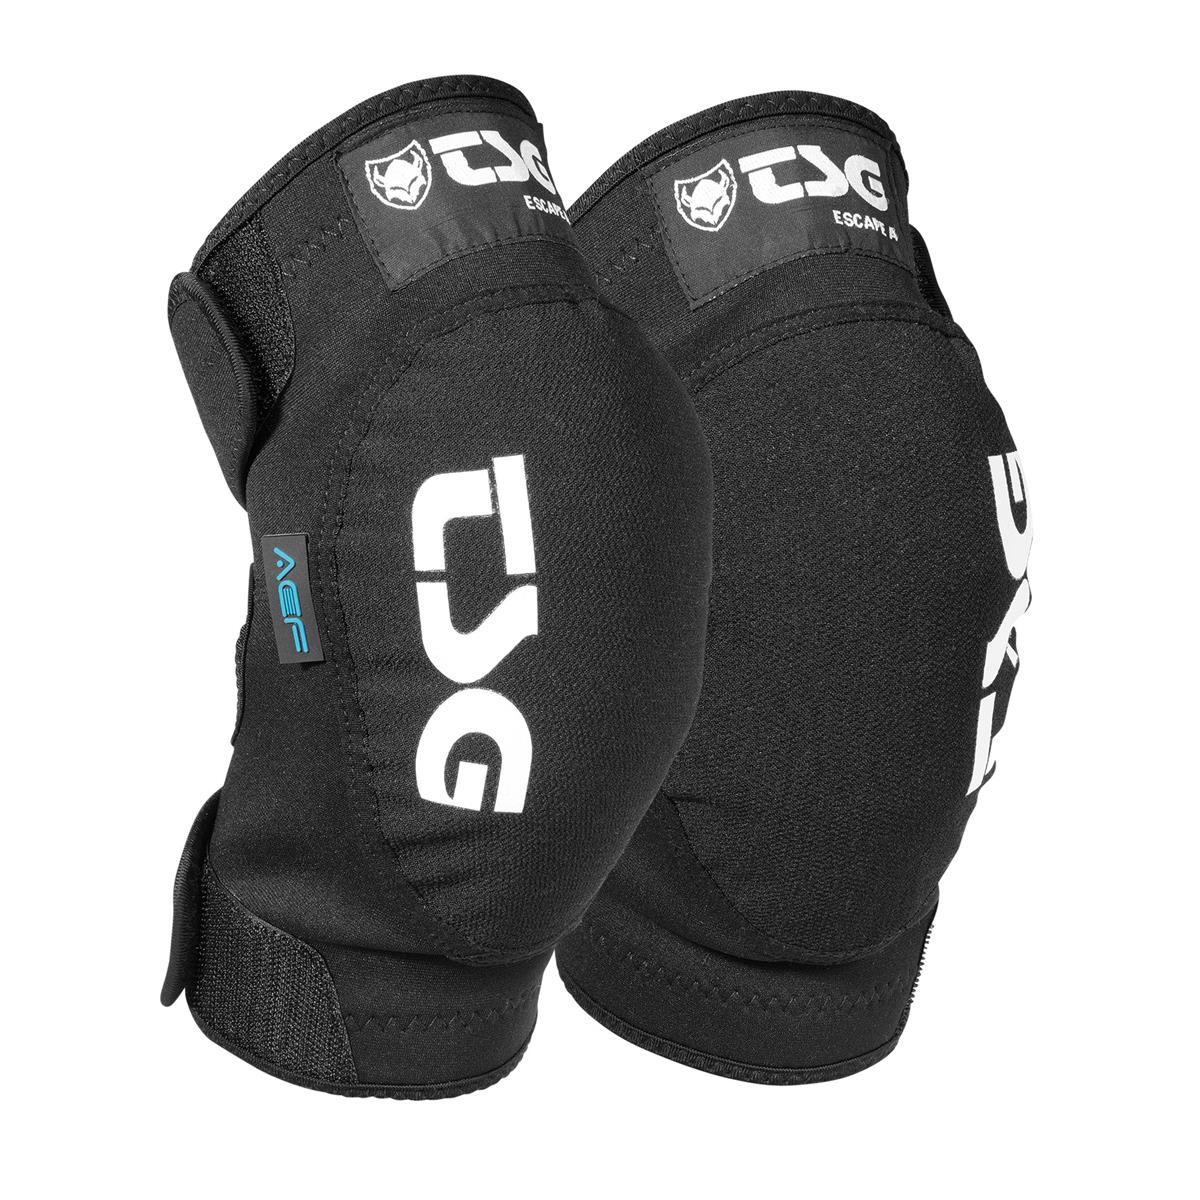 TSG Kneeguard Tahoe A PadsProtective Gear for Bicycle 